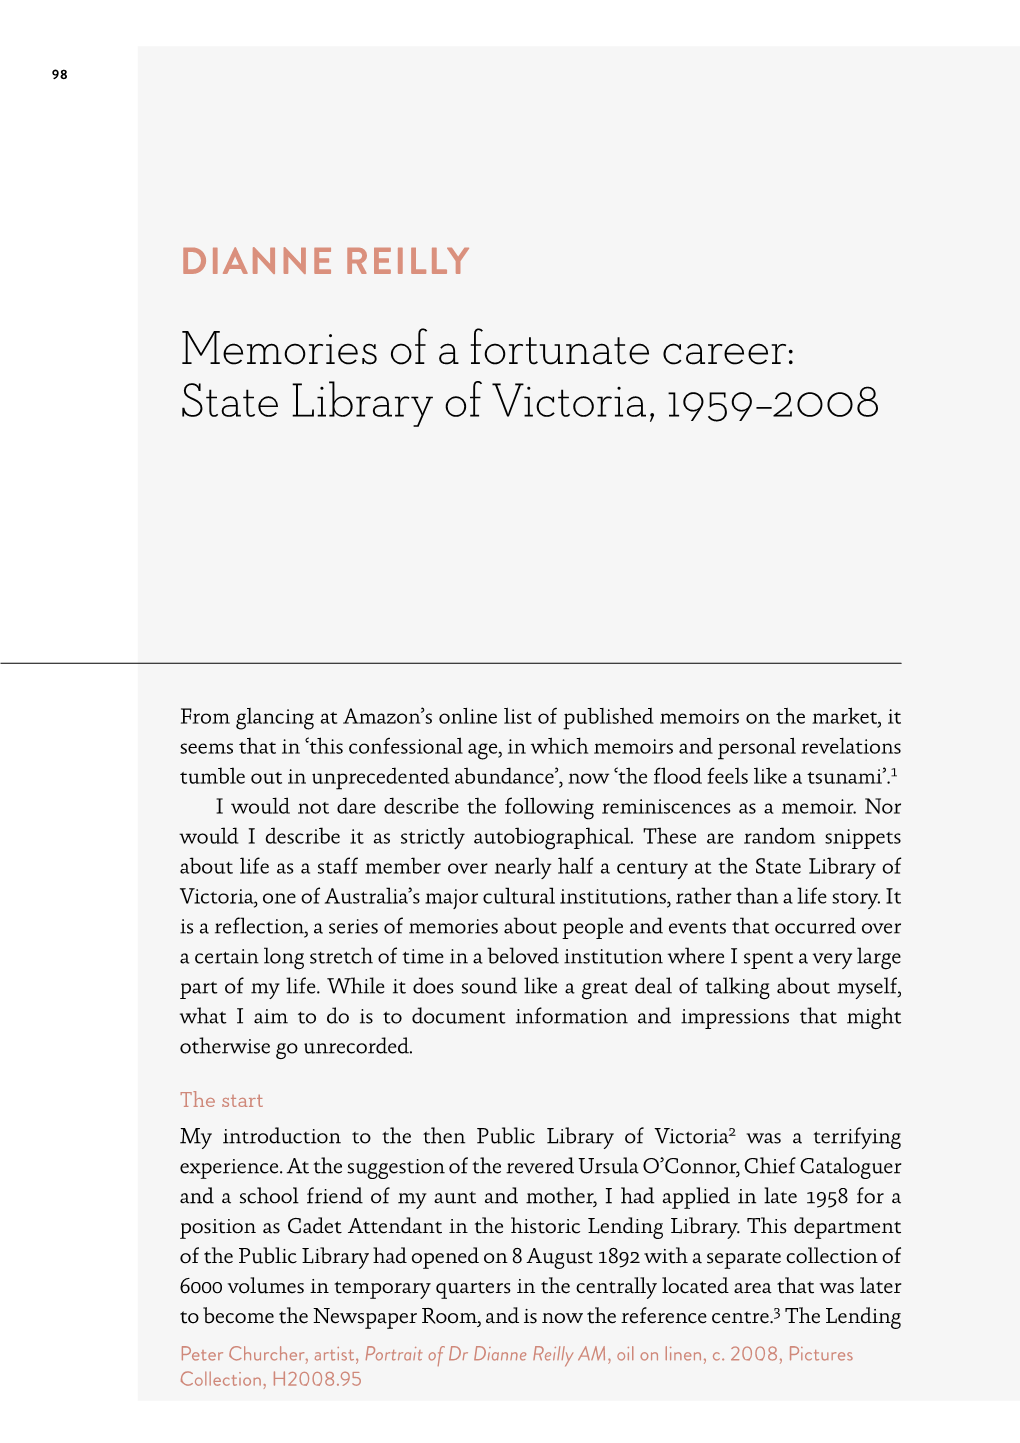 Dianne Reilly: Memories of a Fortunate Career, 1959-2008